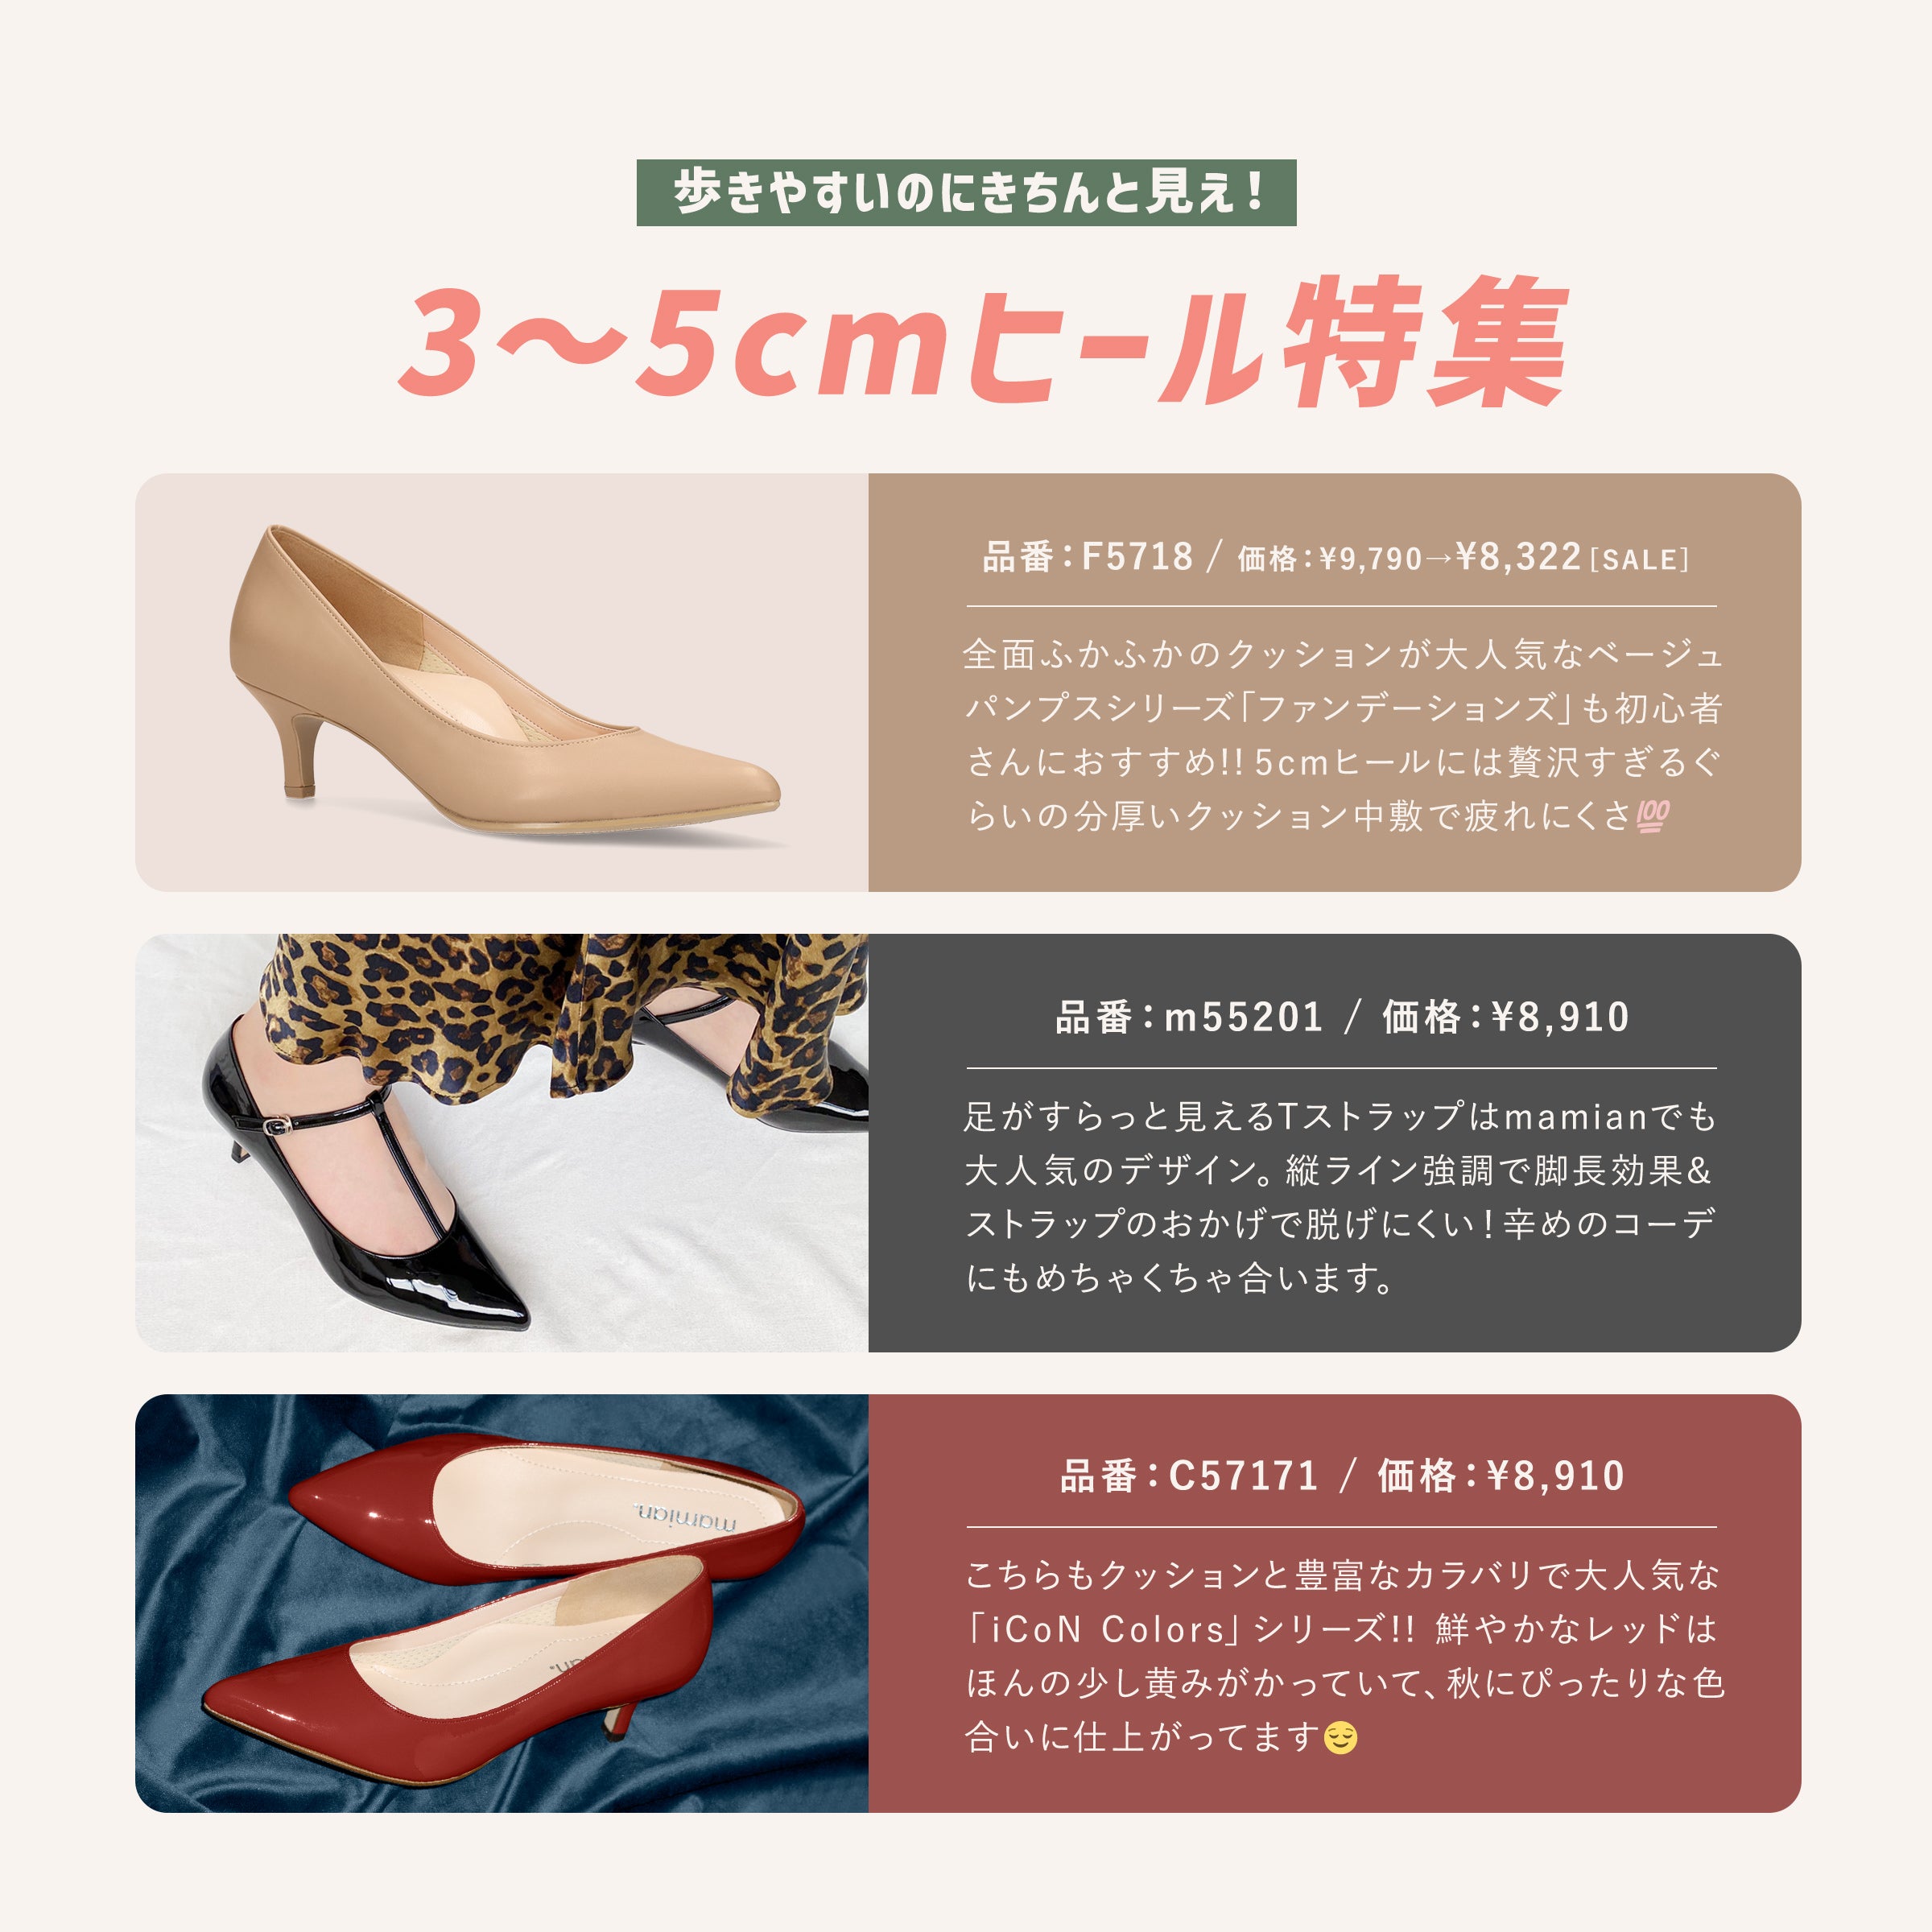 It is easy to walk and looks neat! Low heel feature